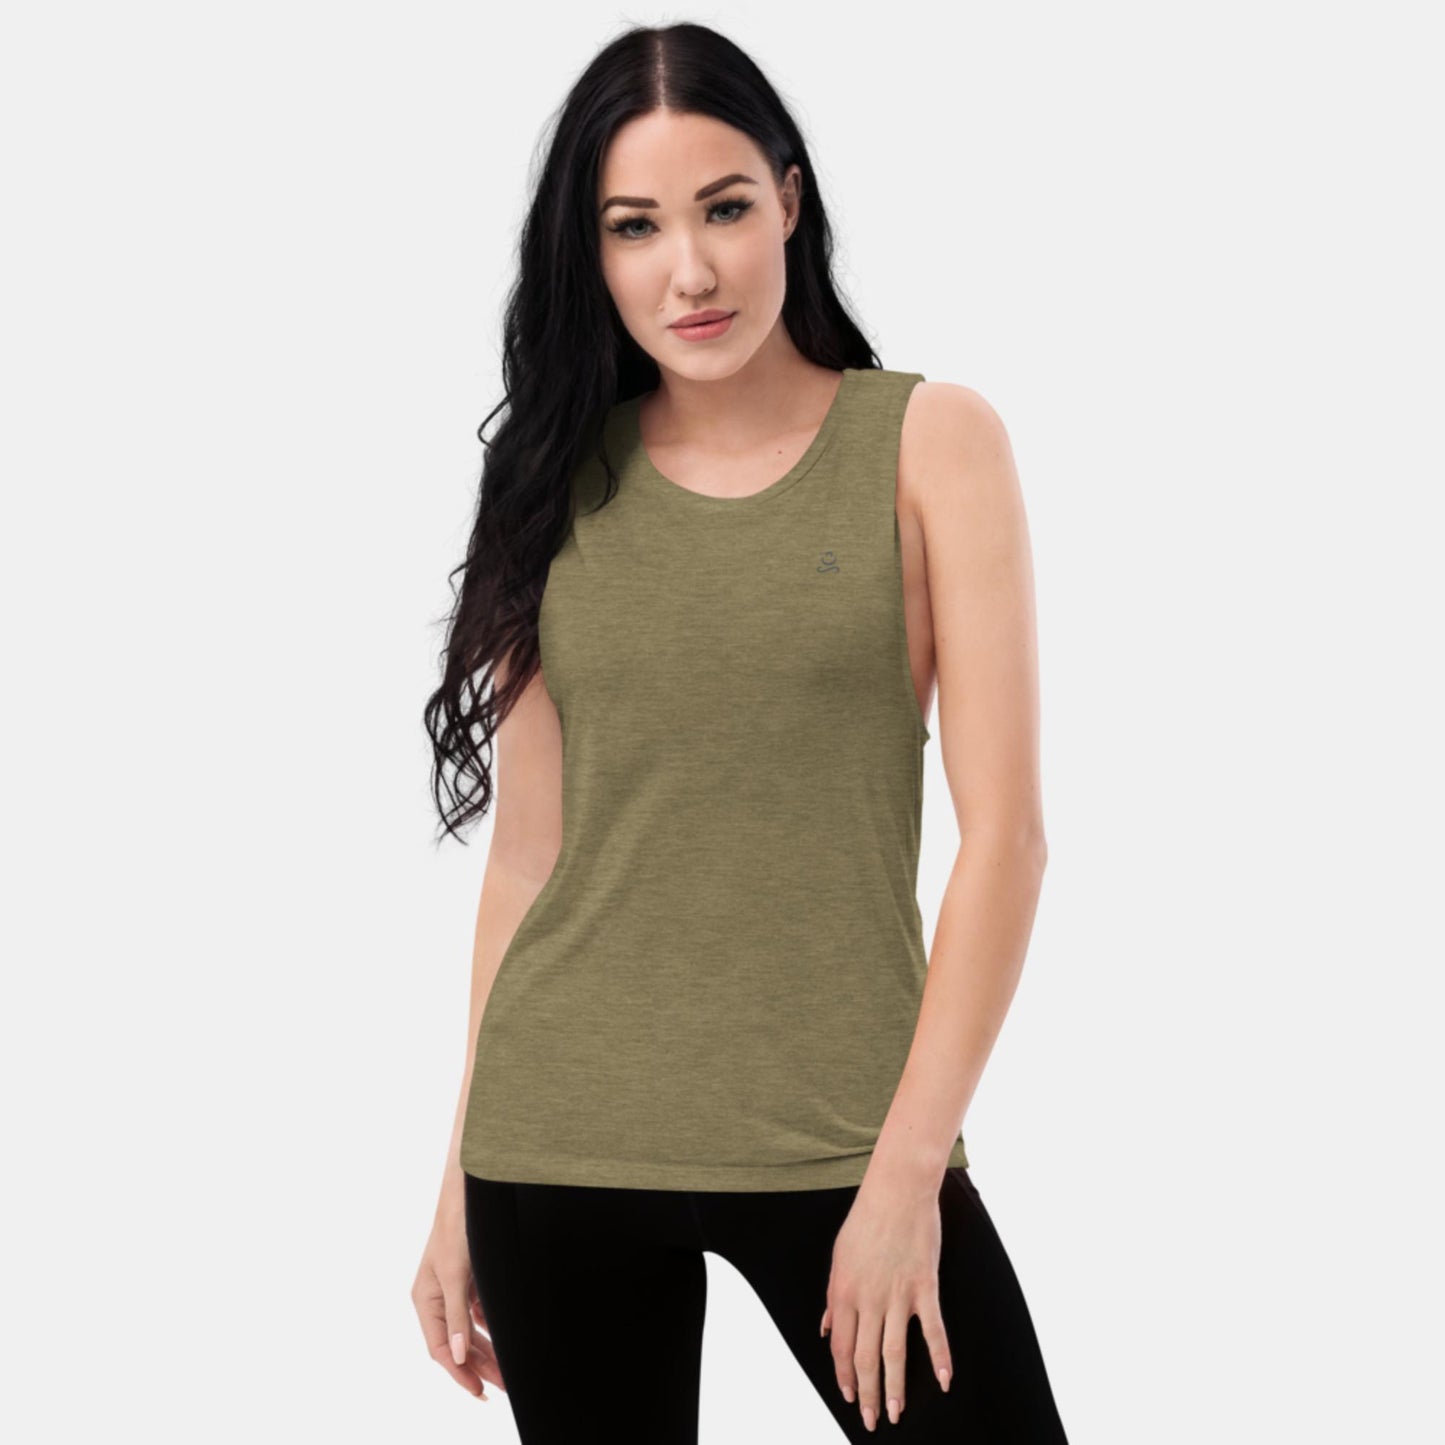 Heather Olive Ladies’ Muscle Tank by Jain Yoga sold by Jain Yoga